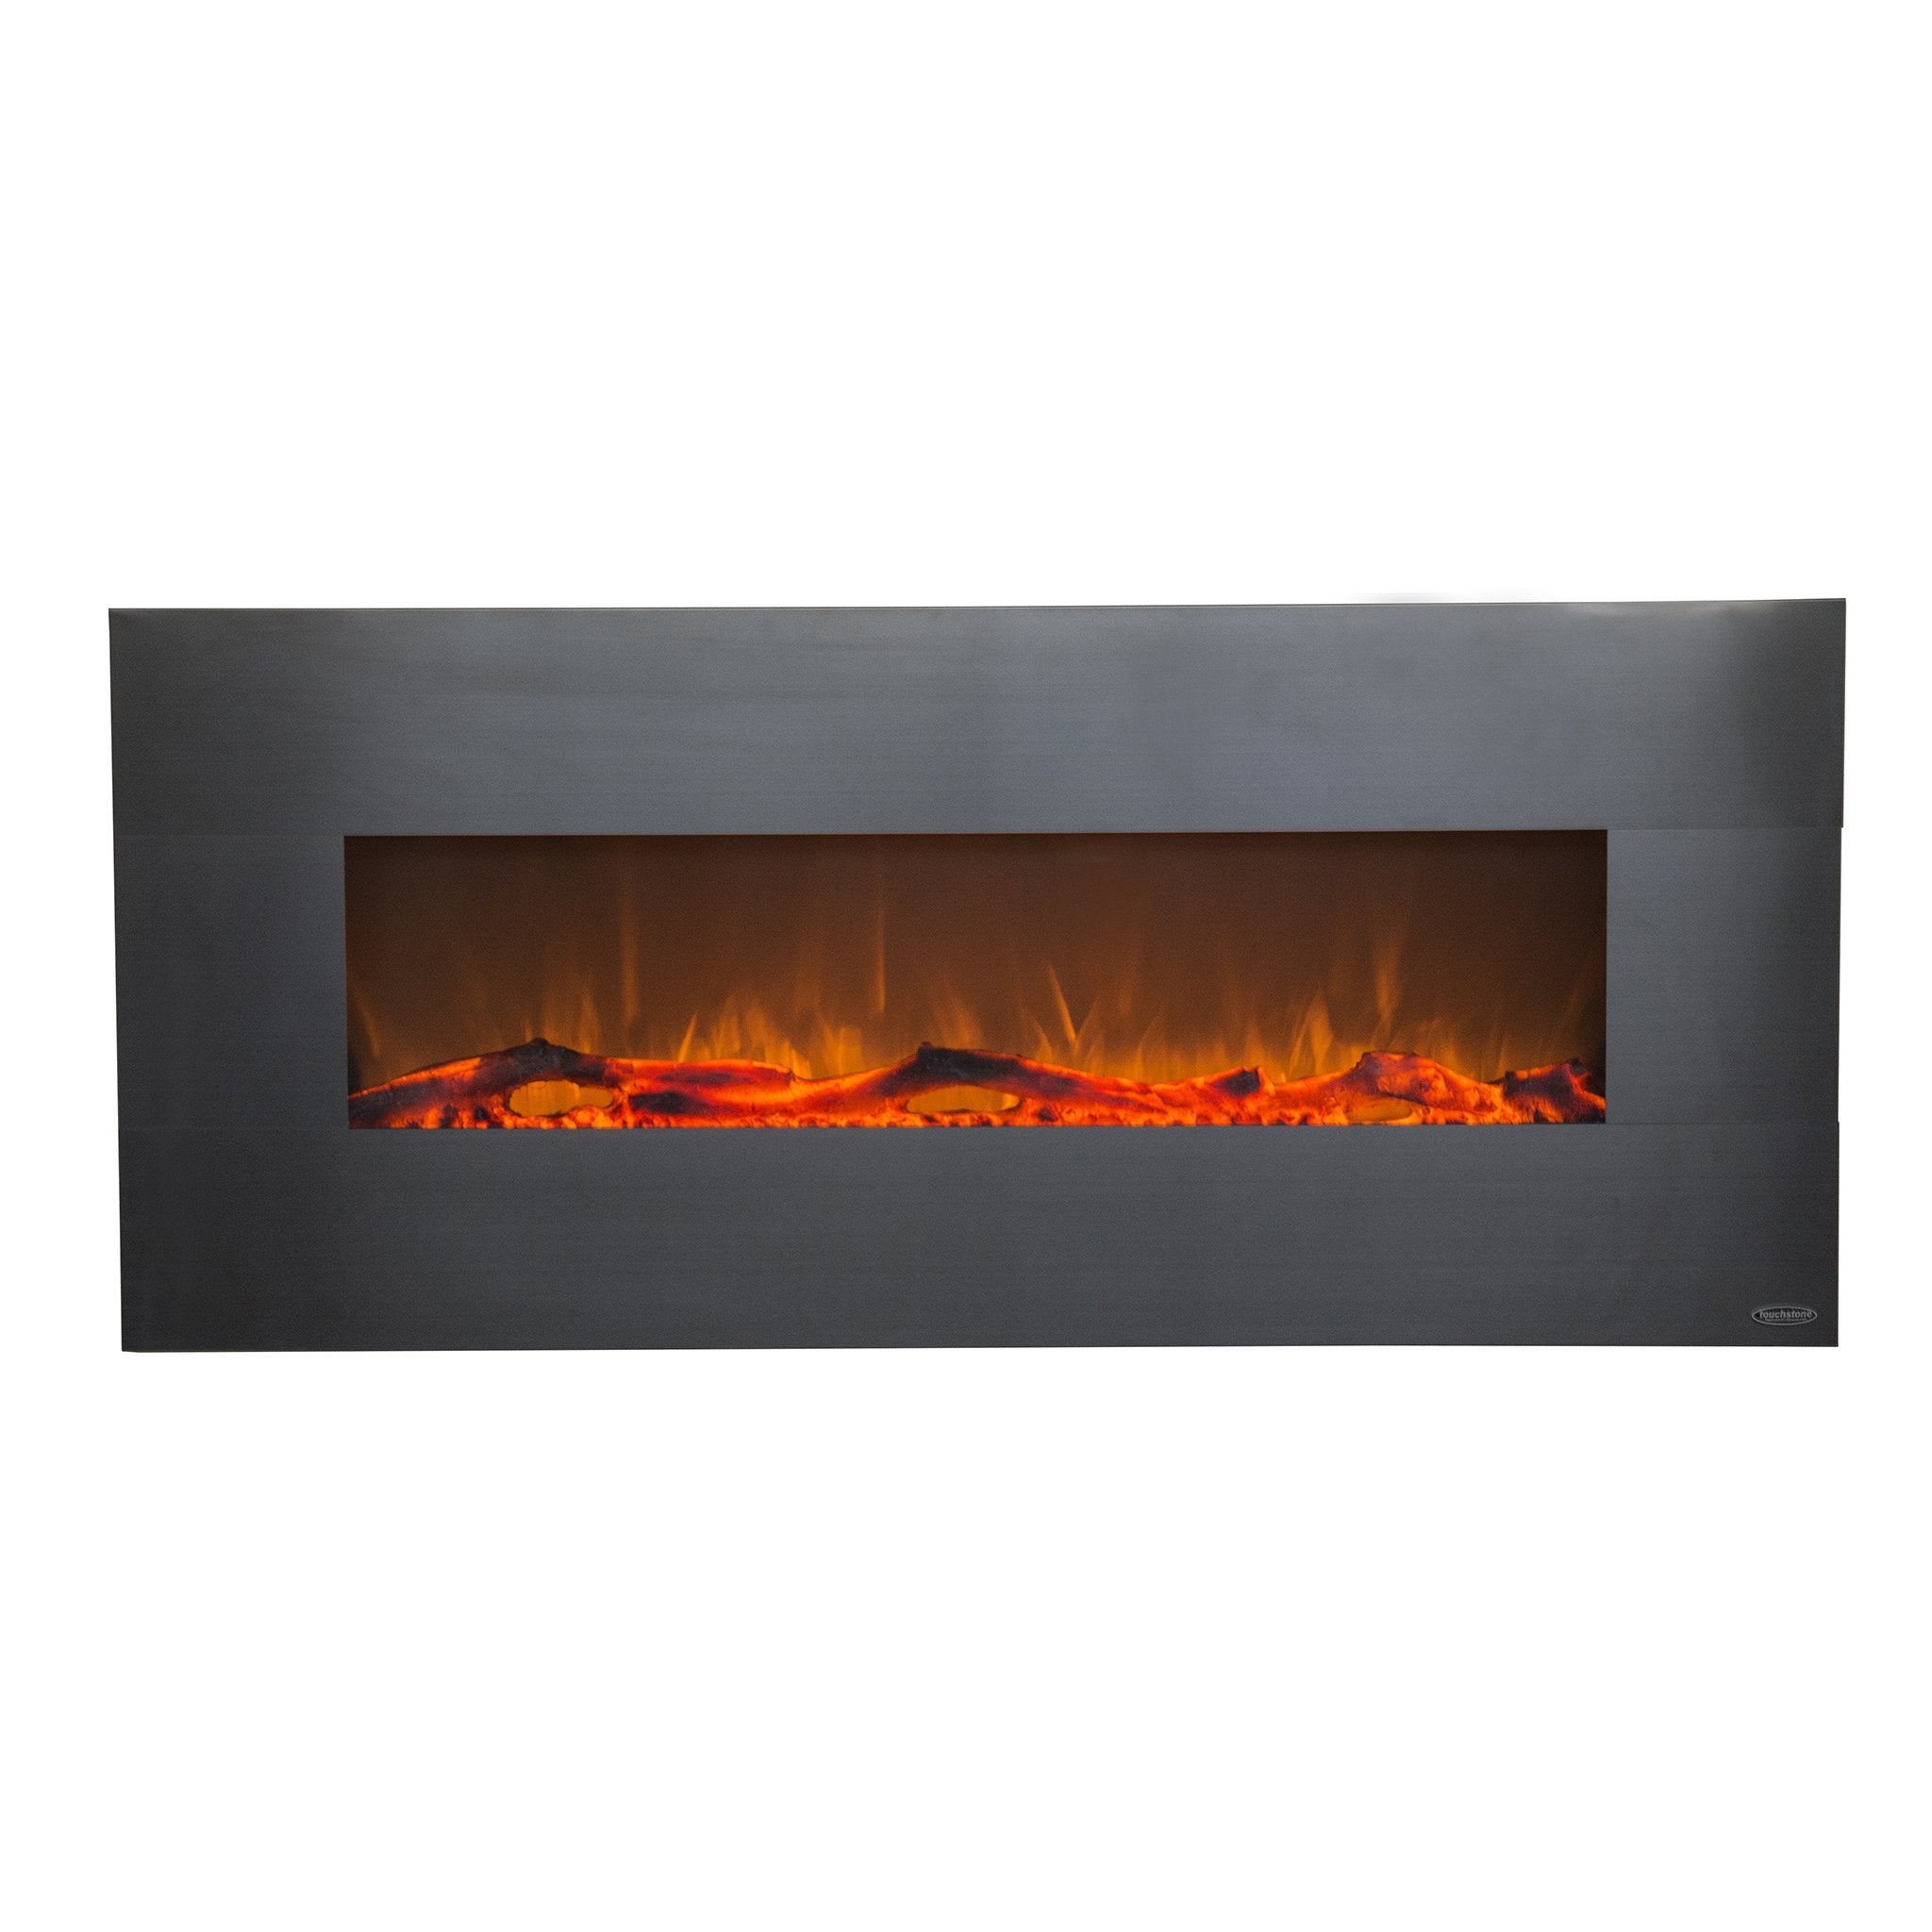 Onyx Stainless 80026  Refurbished Wall Mounted Electric Fireplace - Touchstone Home Products, Inc.